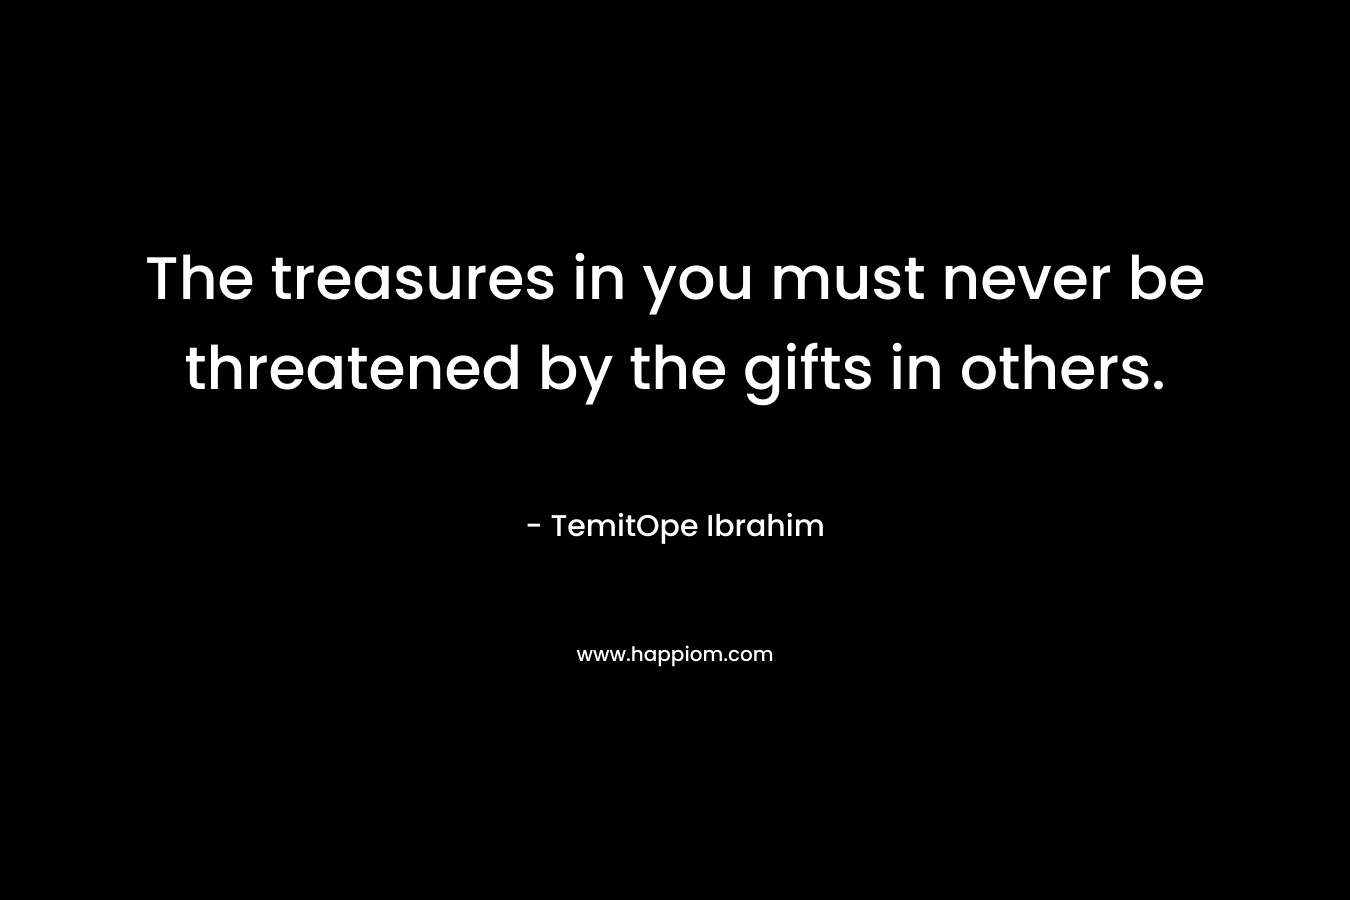 The treasures in you must never be threatened by the gifts in others.